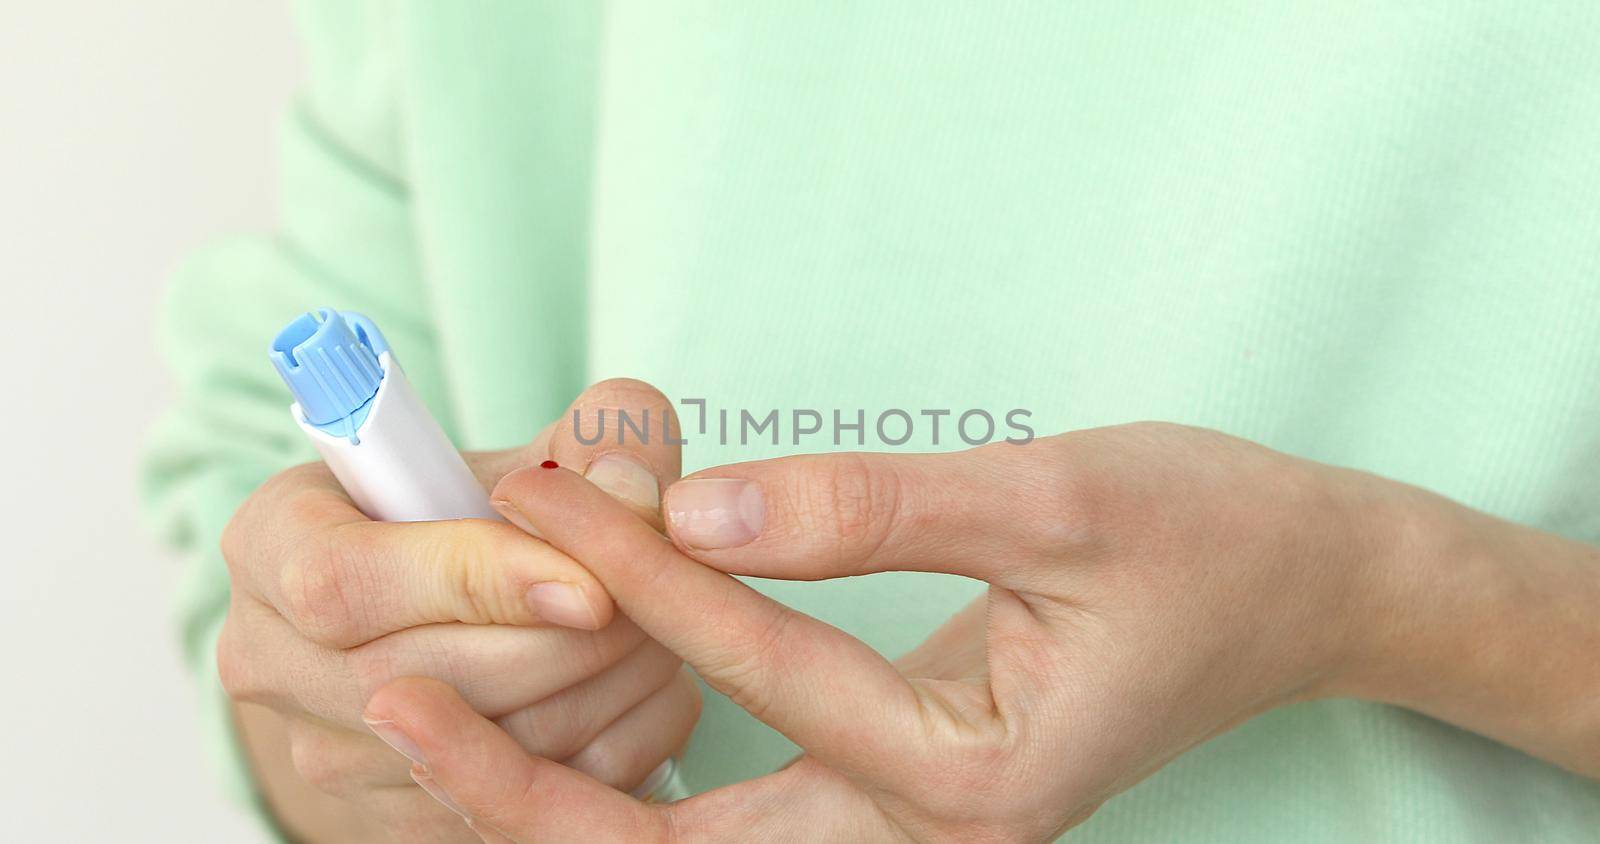 Girl diabetic puncture finger to measure blood by Demkat